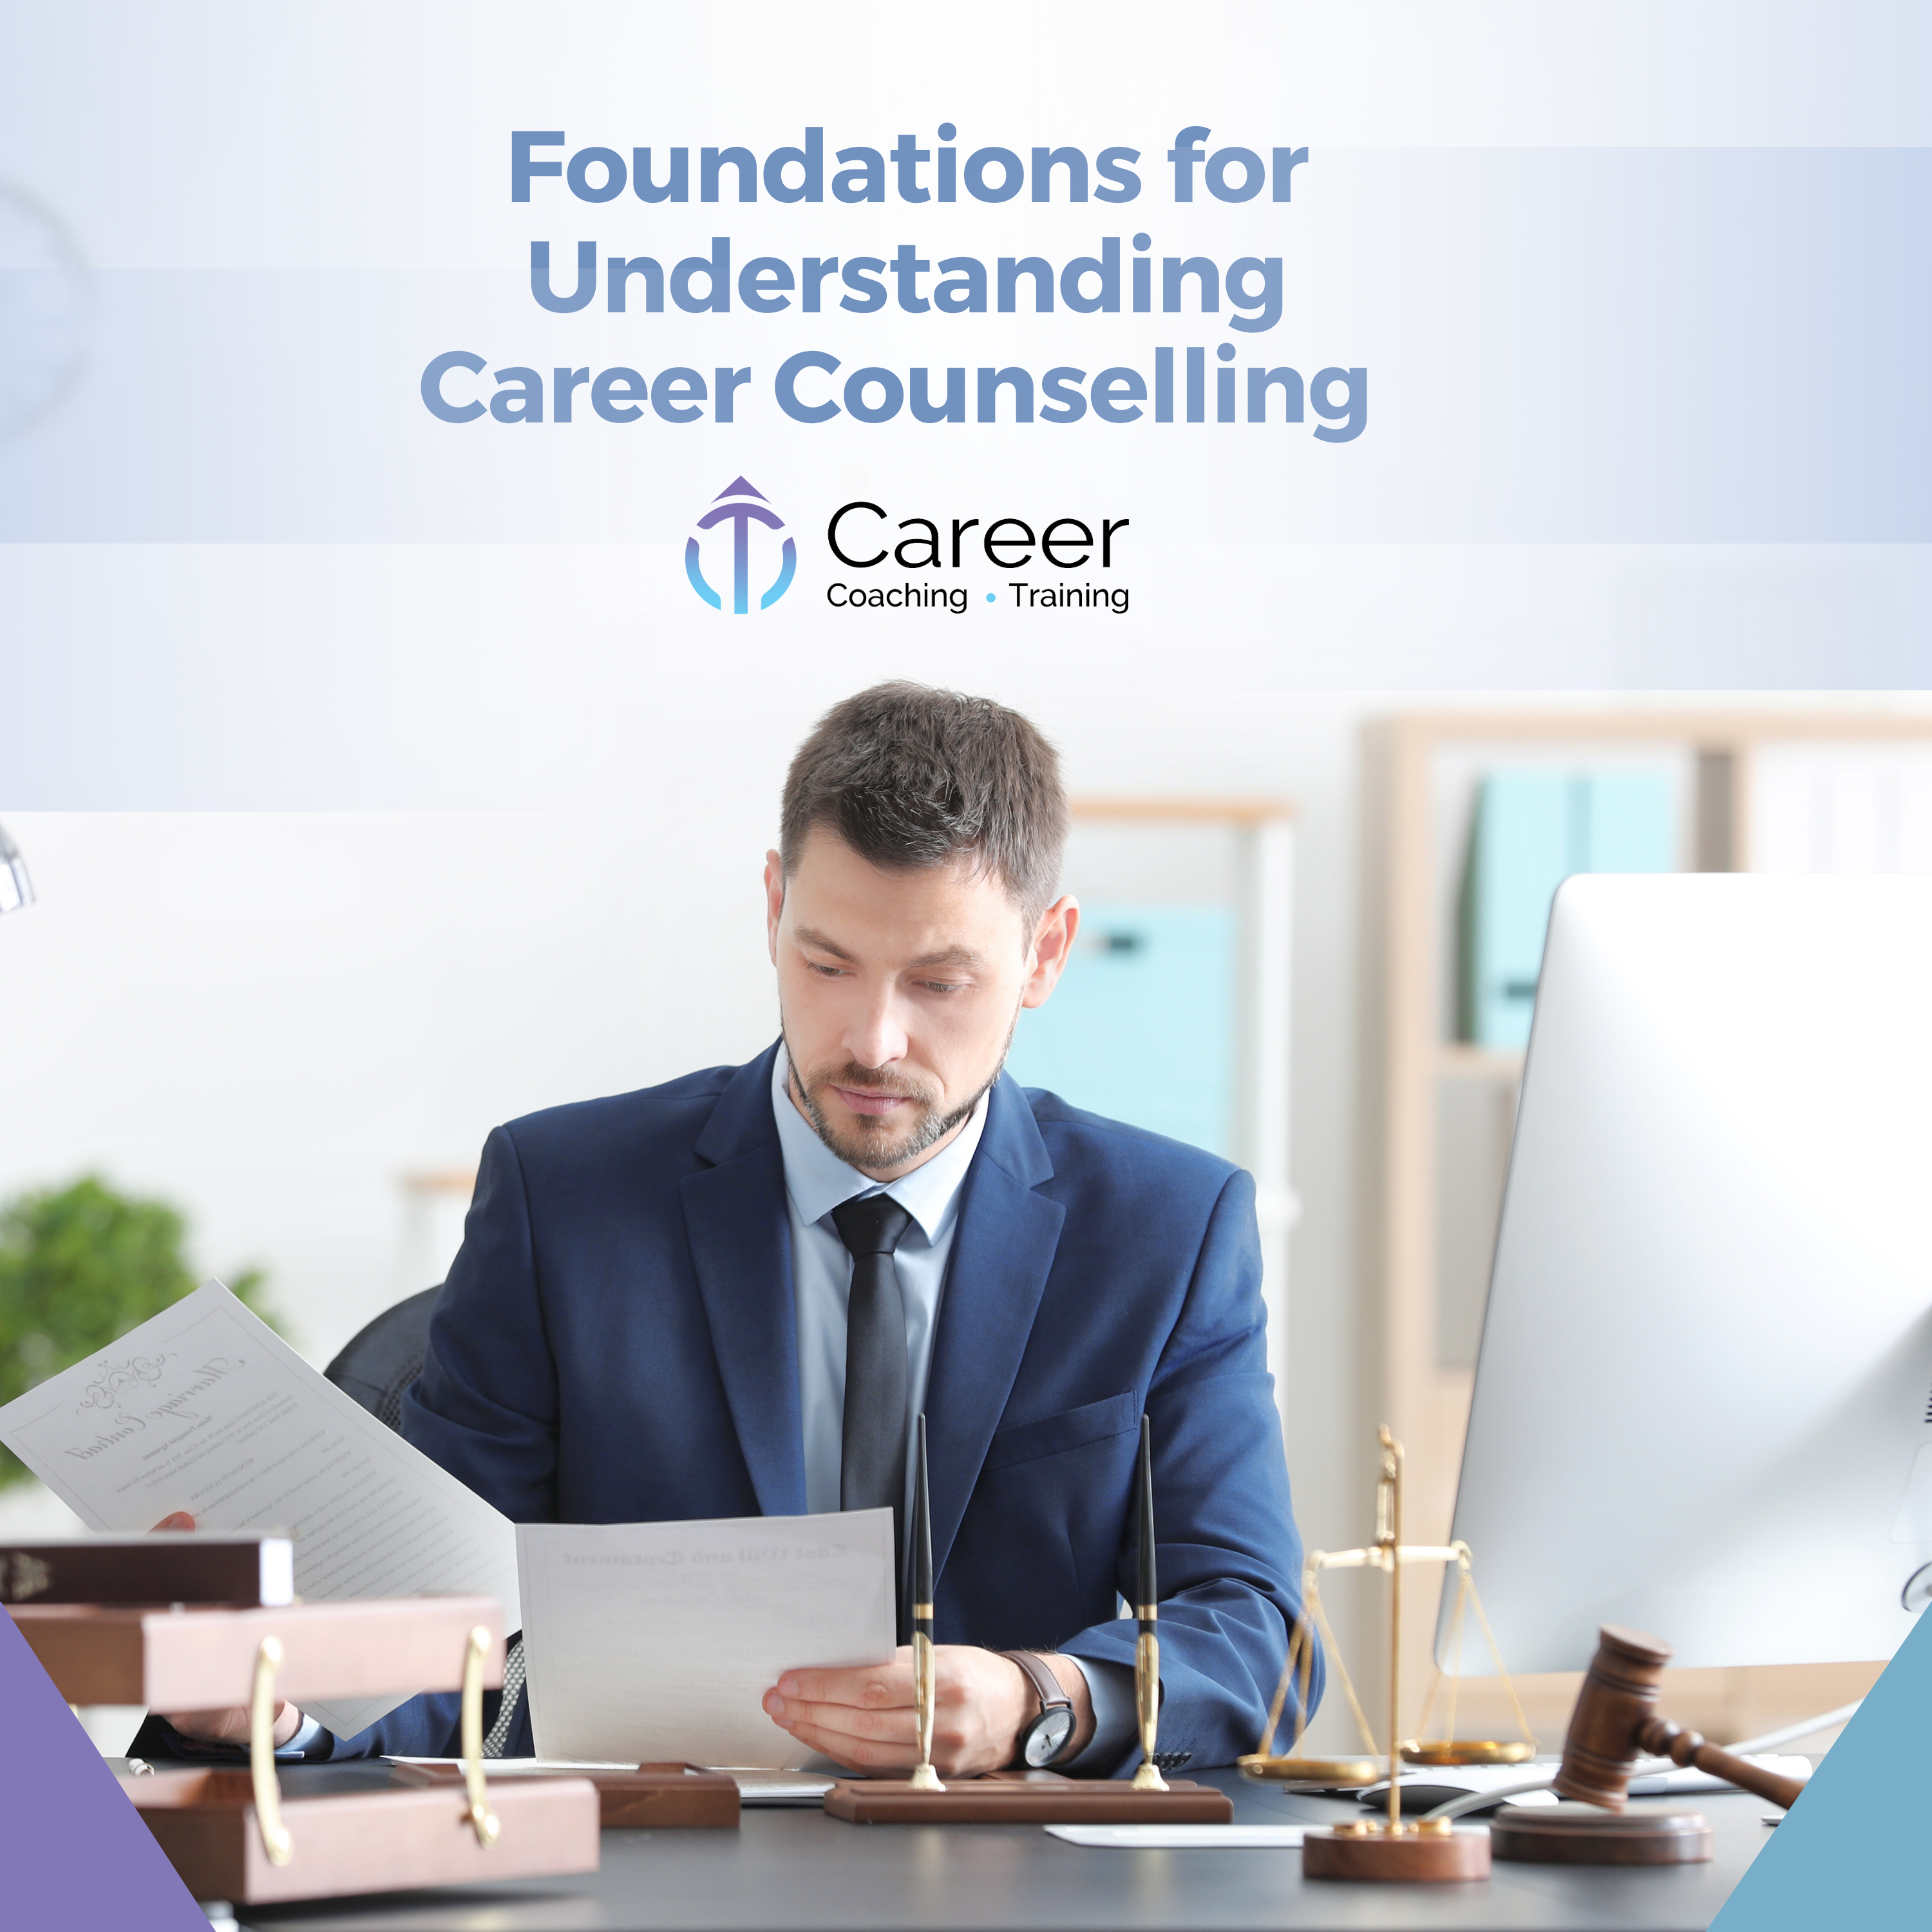 Foundations for Understanding Career Counselling